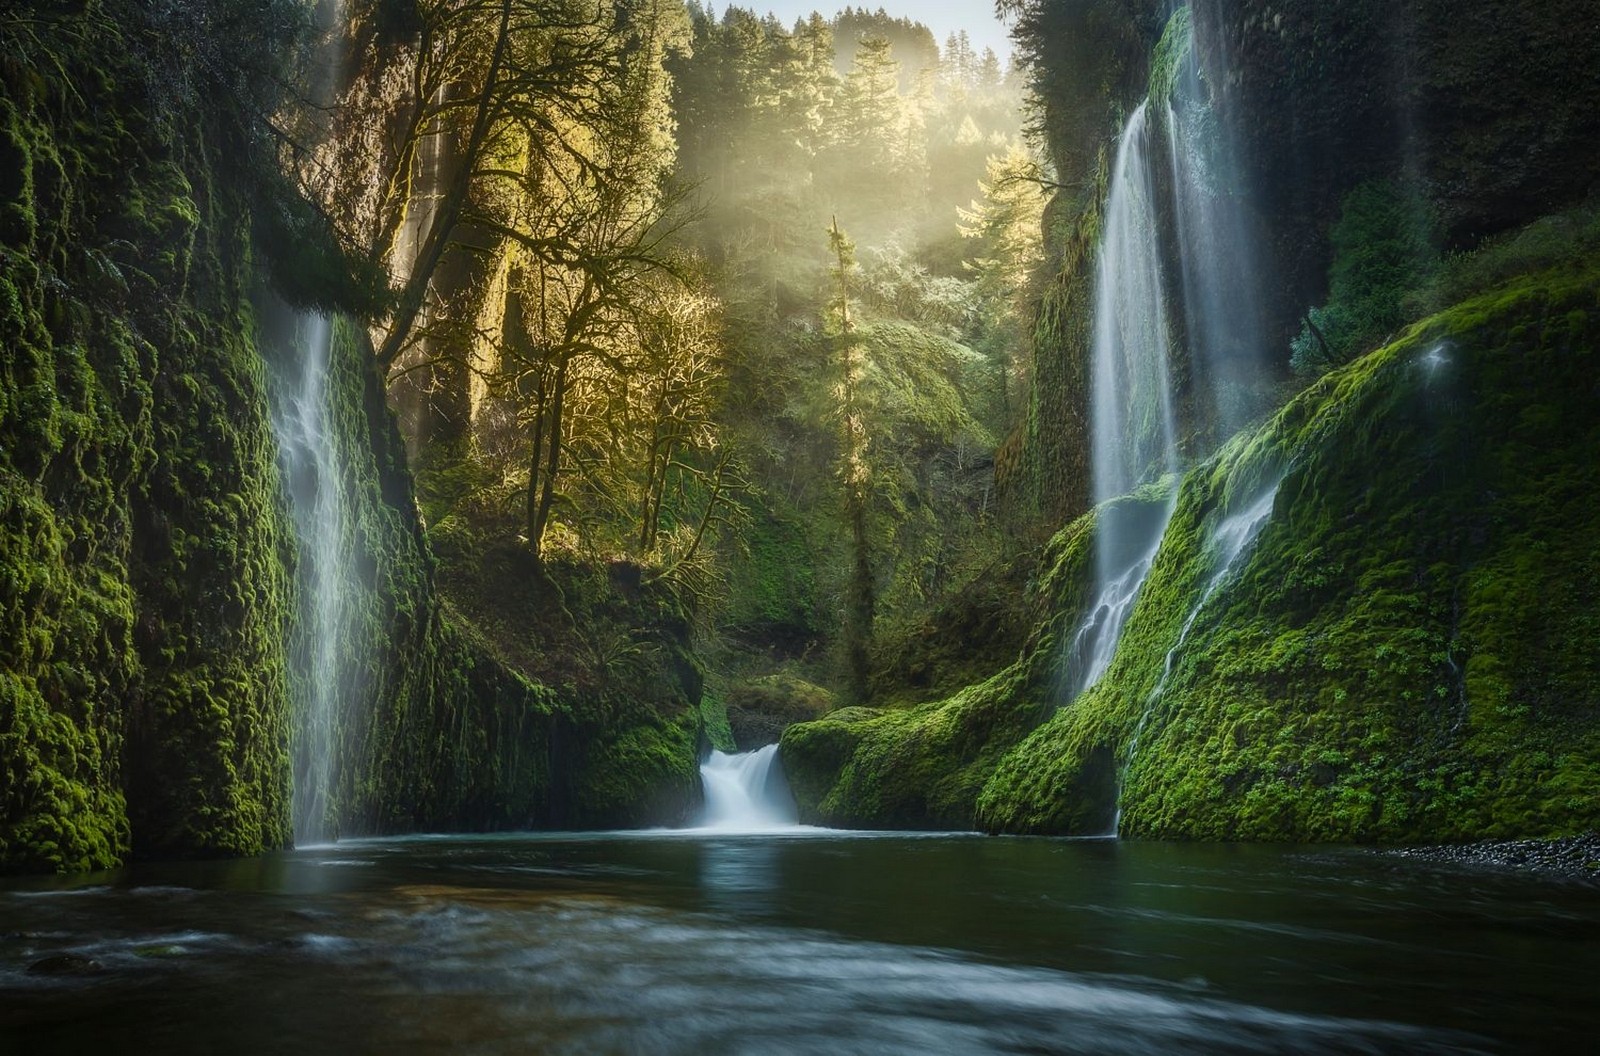 photography, Landscape, Nature, Waterfall, Moss, River, Forest, Morning, Sunlight, Sun rays Wallpaper